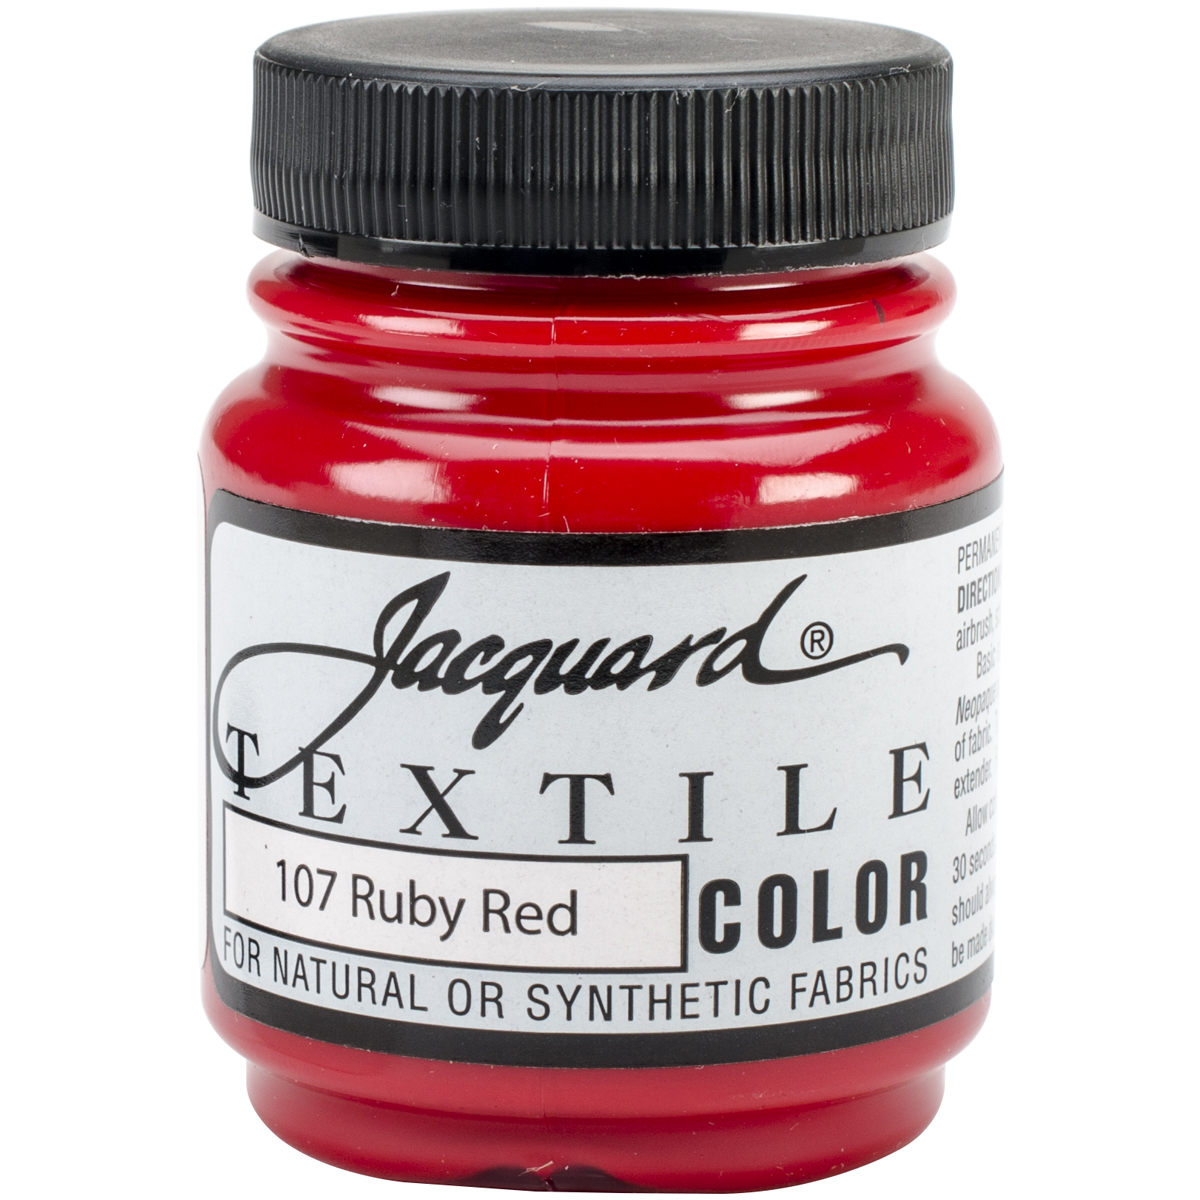 Jacquard Textile Color Fabric Paint 2.25oz-Ruby Red, Set Of 3 | eBay